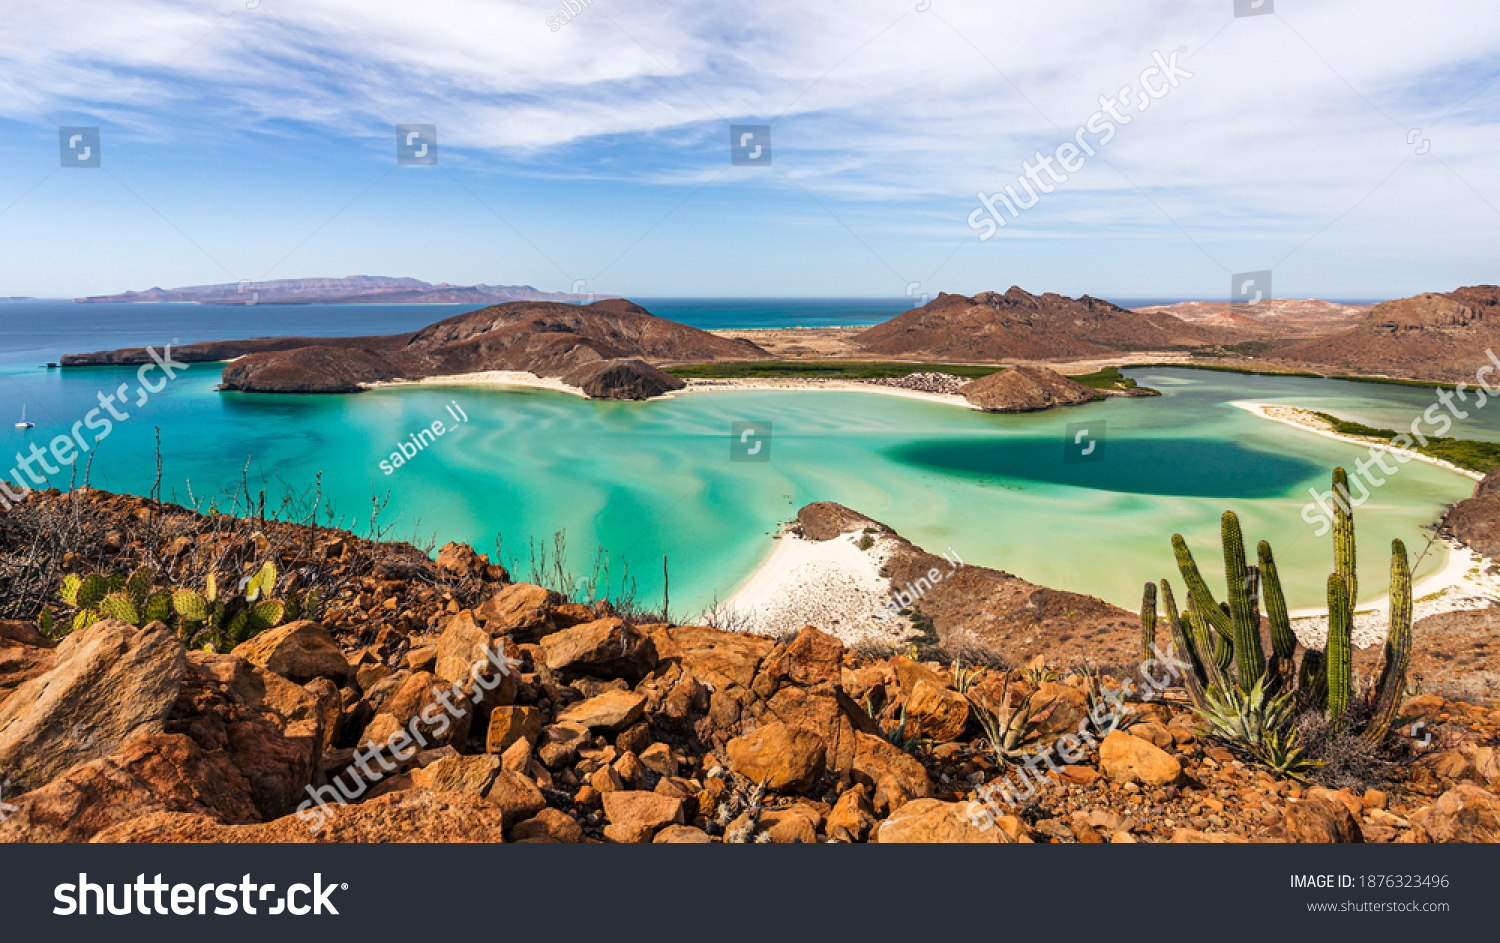 View of stunning bay in Baja California, Mexico #1876323496